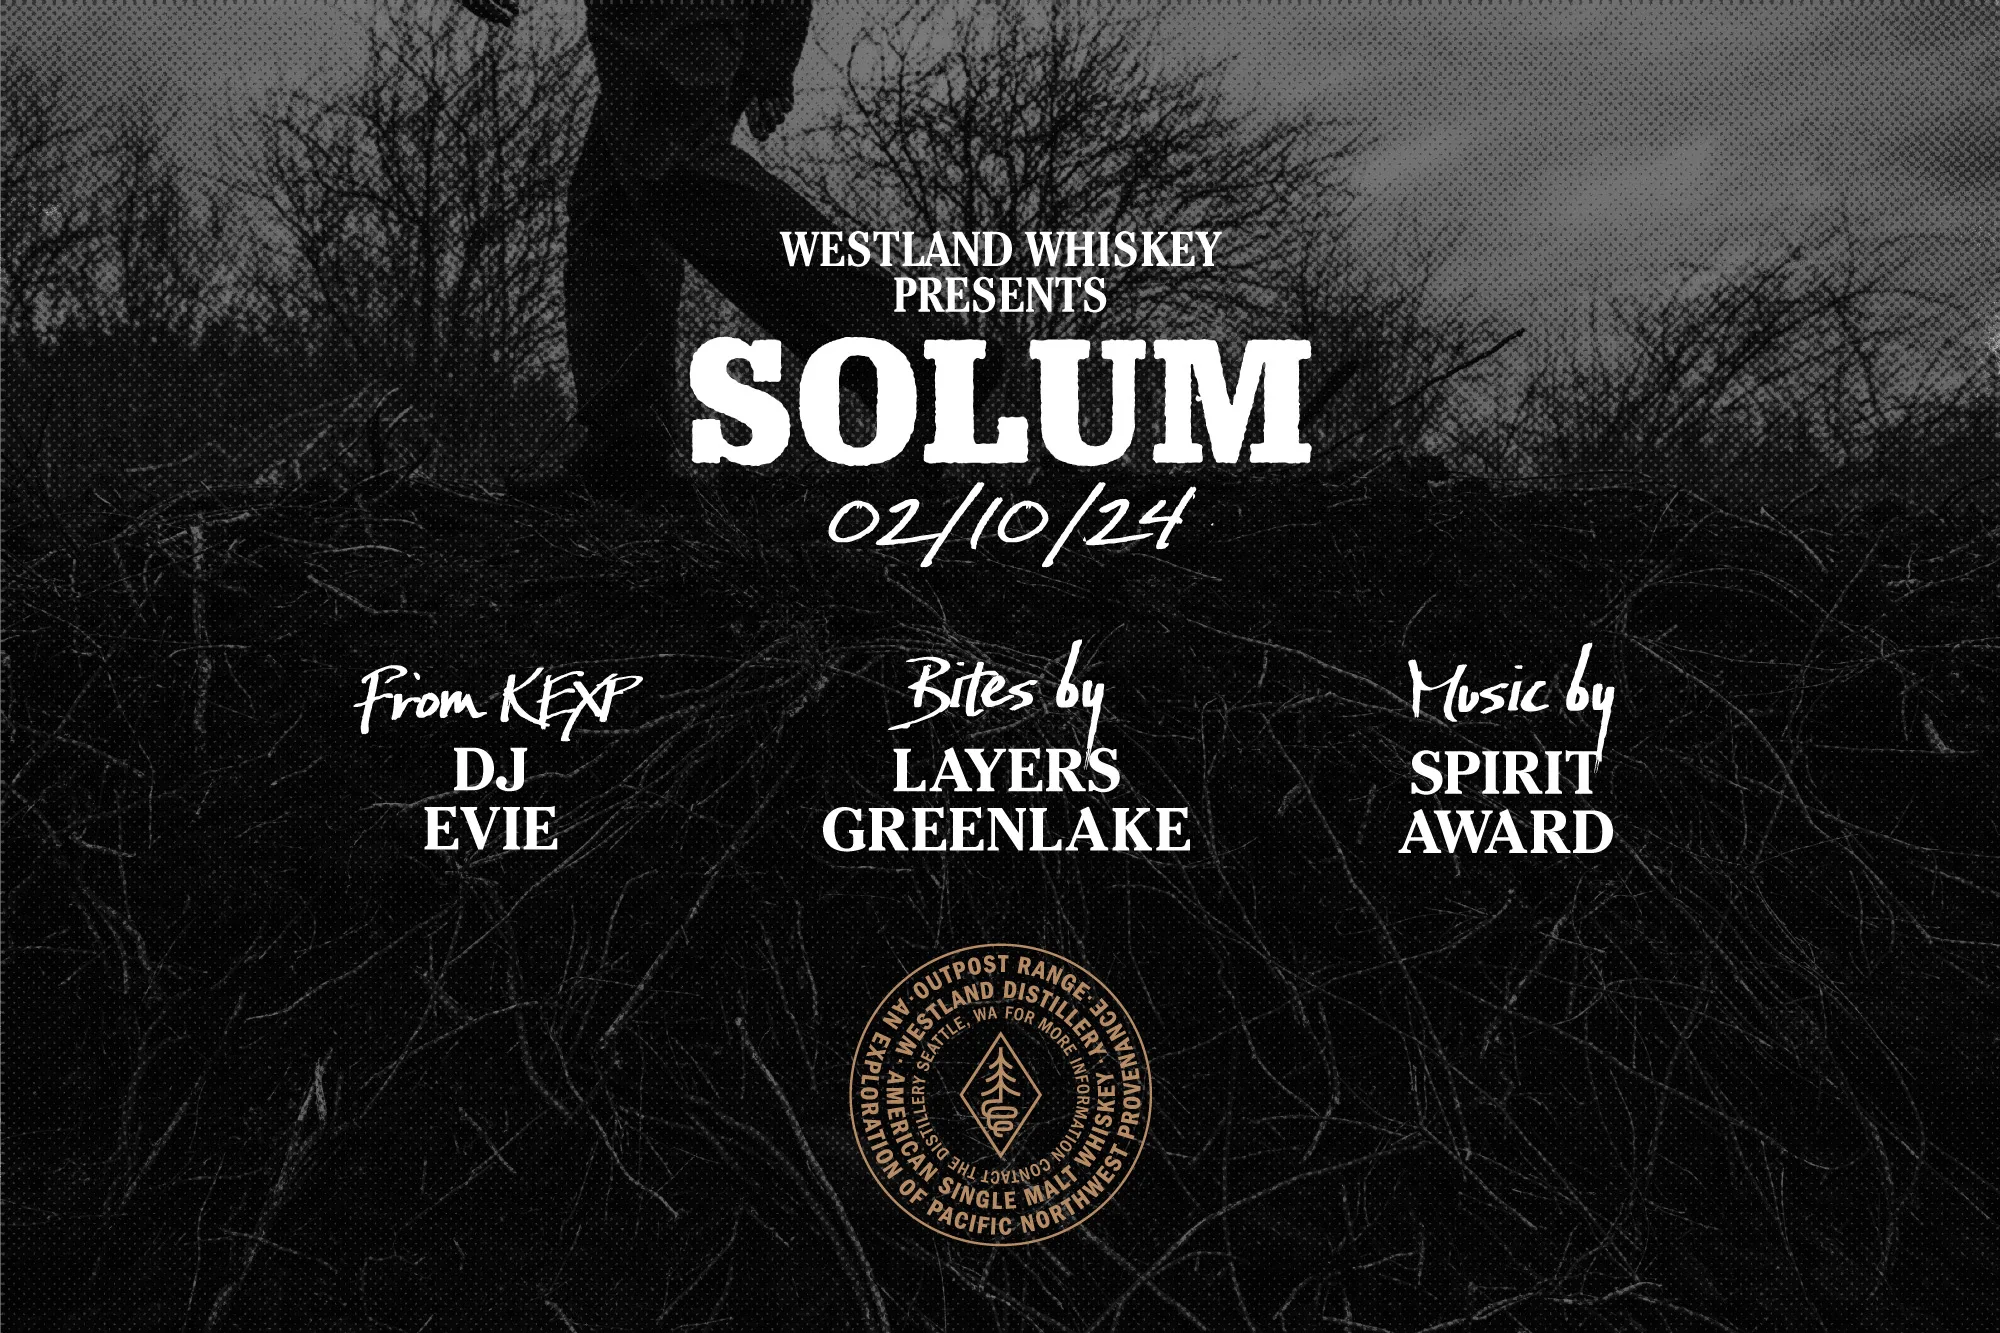 A poster promoting the release party for Solum 2